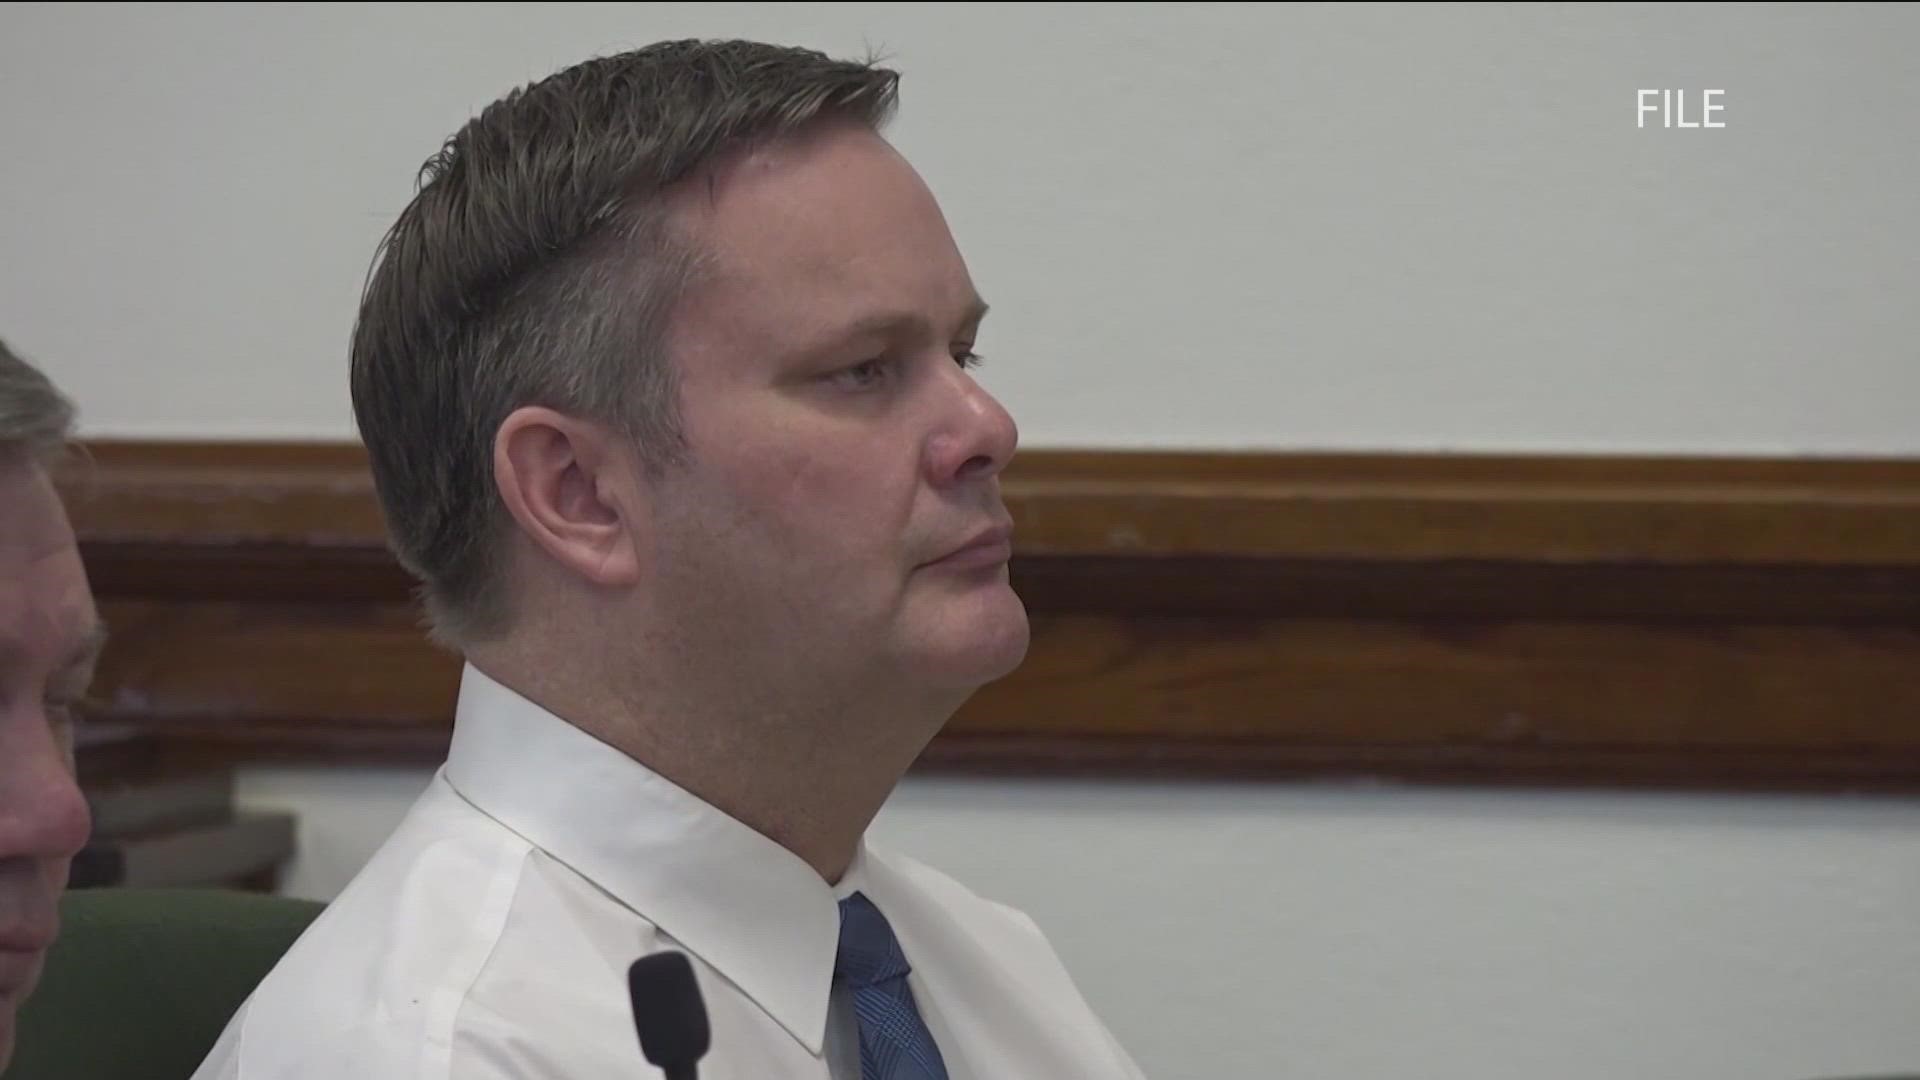 Daybell's attorney, John Prior, wanted a continuance, not a complete stay, because that would hinder their ability to prep and move forward on Daybell's case.